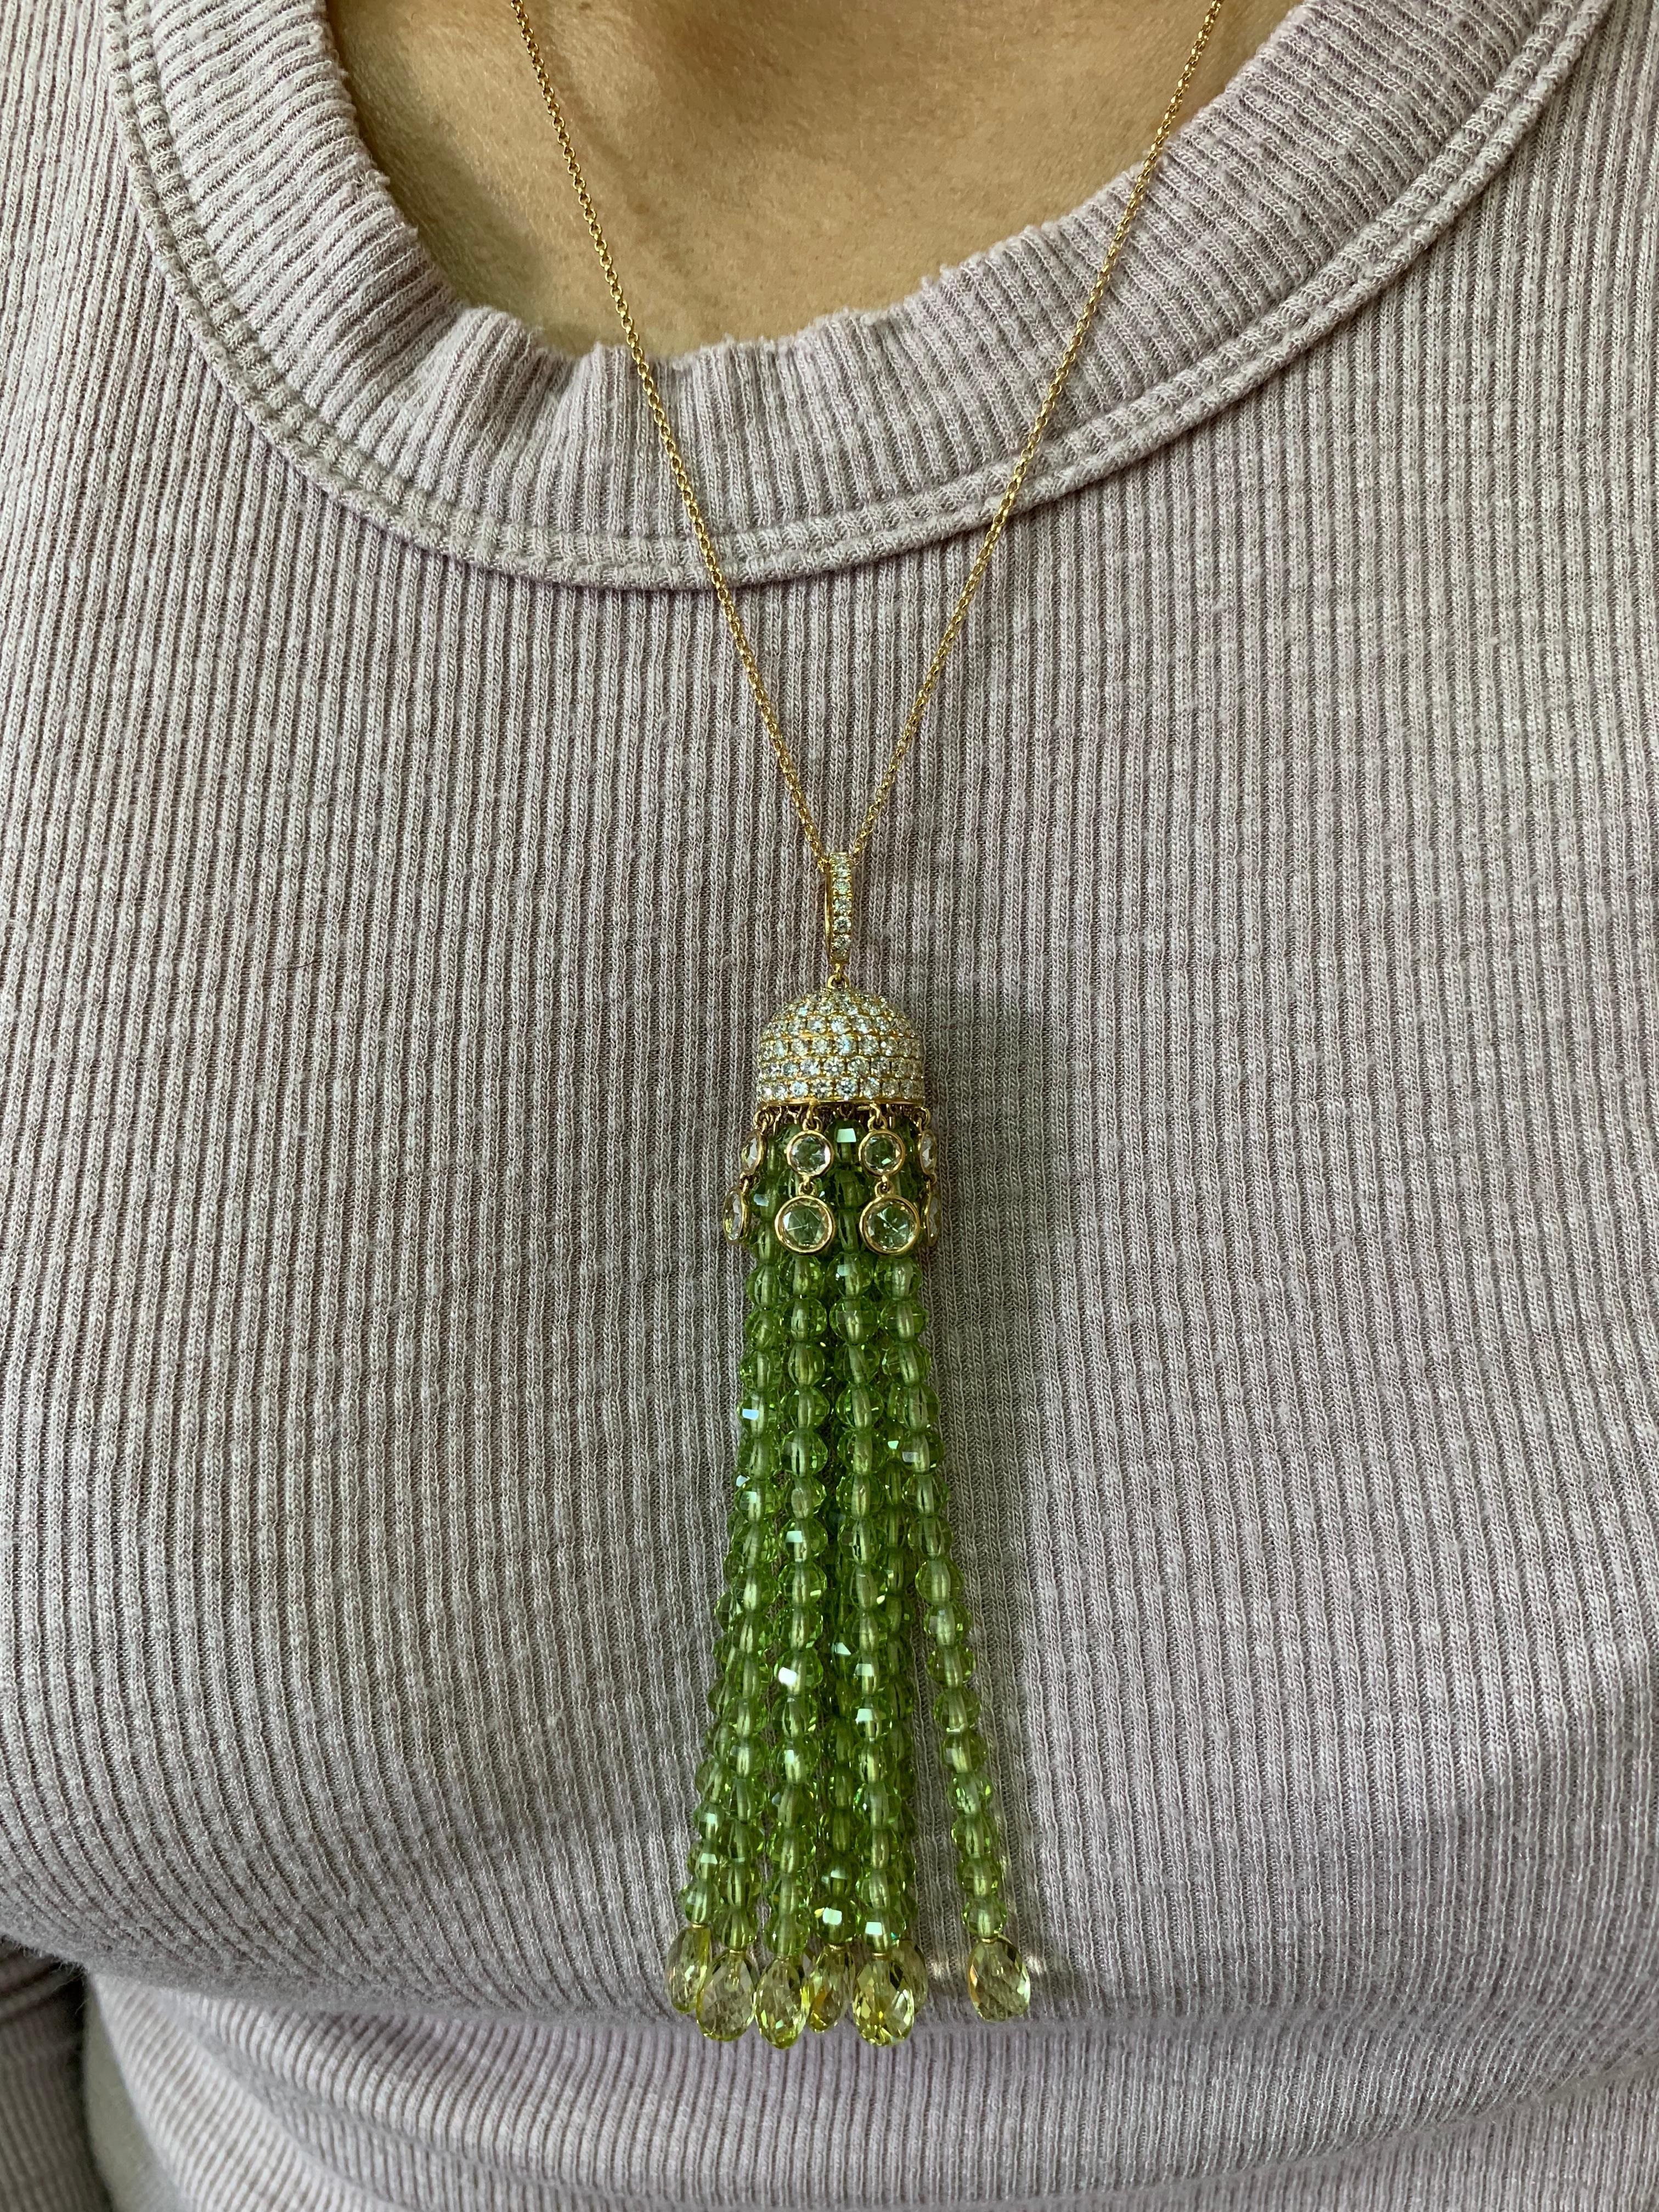 This is an elegant peridot, lemon quartz, and crystal necklace using a mixture of cuts to accentuate the beauty of the gemstones. This is a light and fun drop necklace with a pop of color with the use of these colorful gems.

Designer peridot, lemon